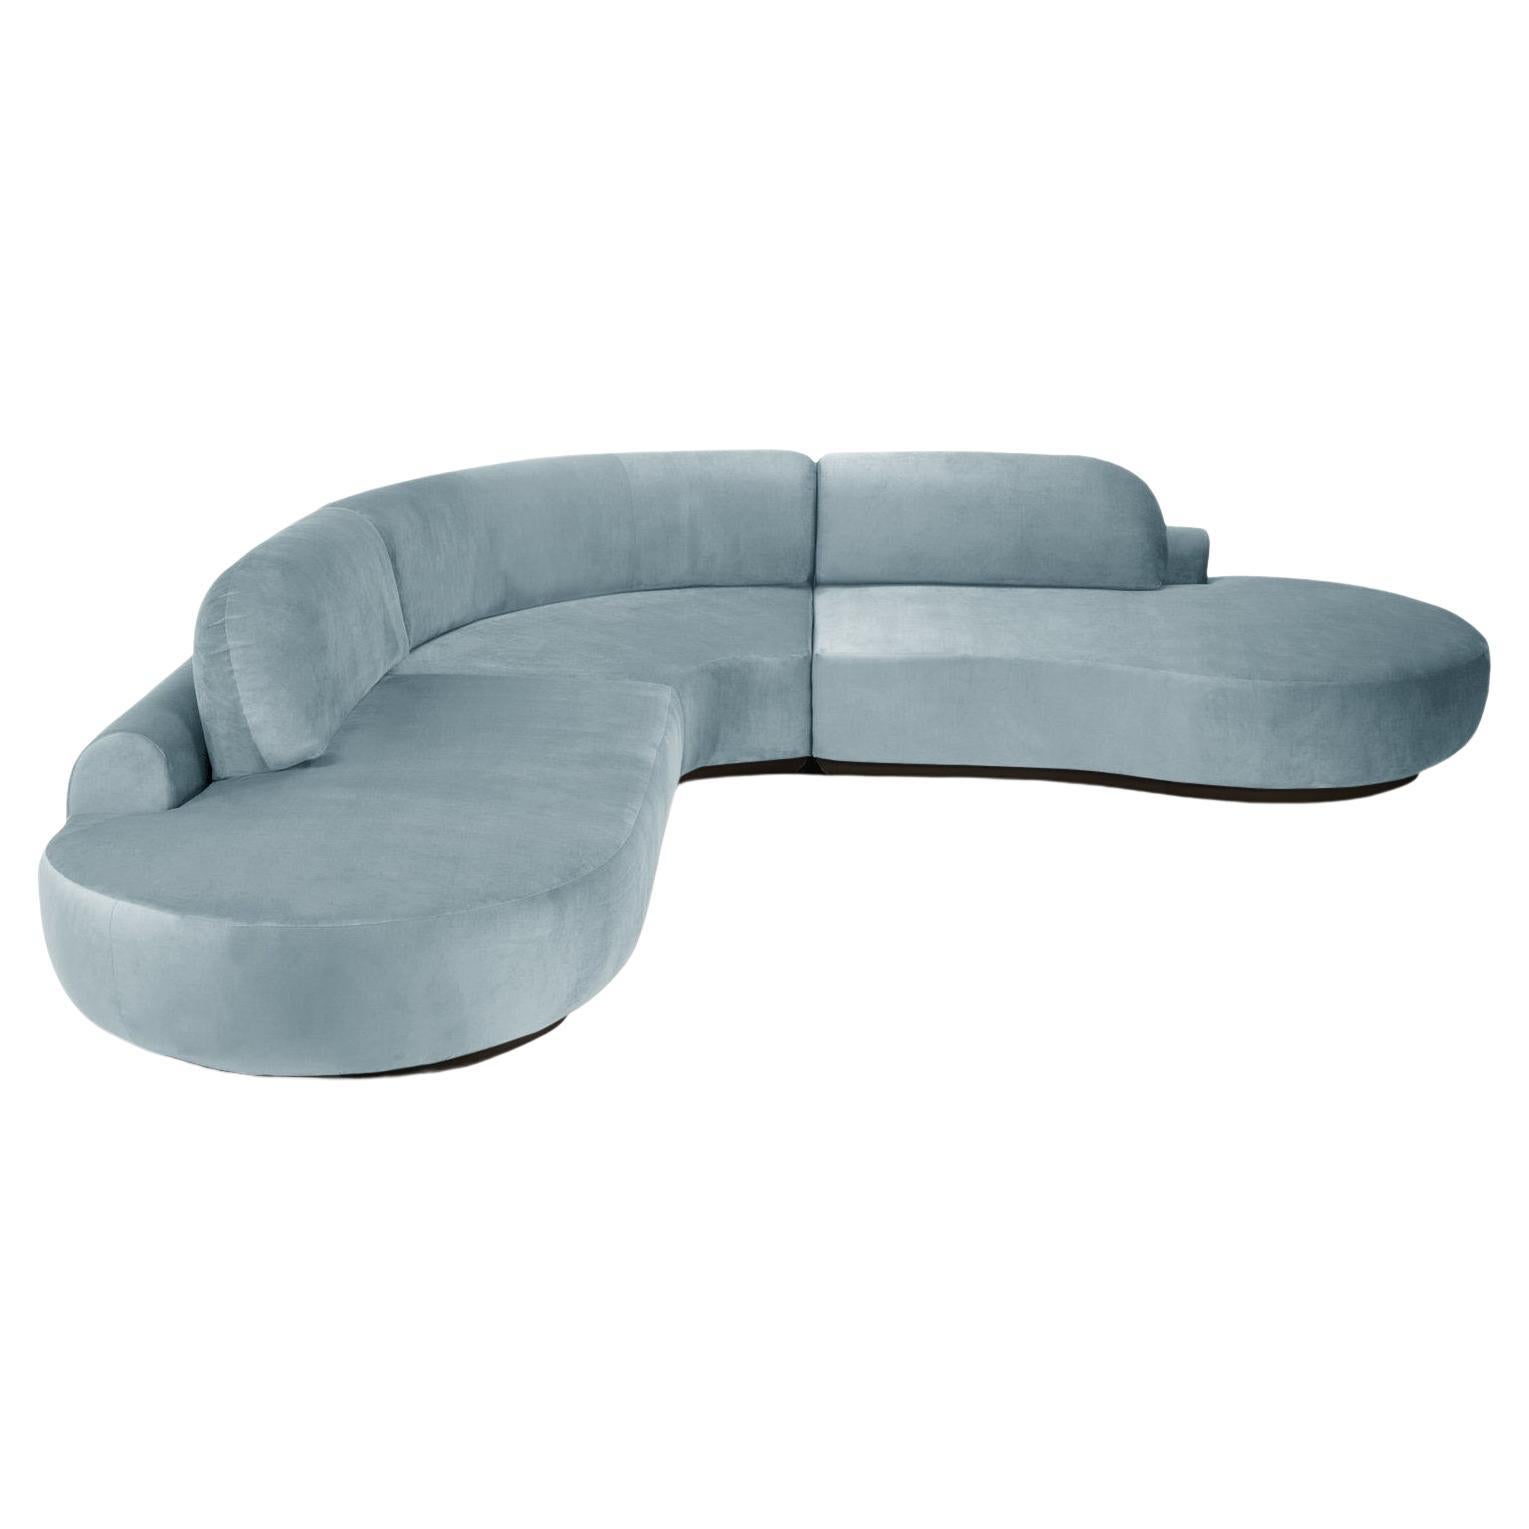 Naked Curved Sectional Sofa, 3 Piece with Beech Ash-056-5 and Paris Safira